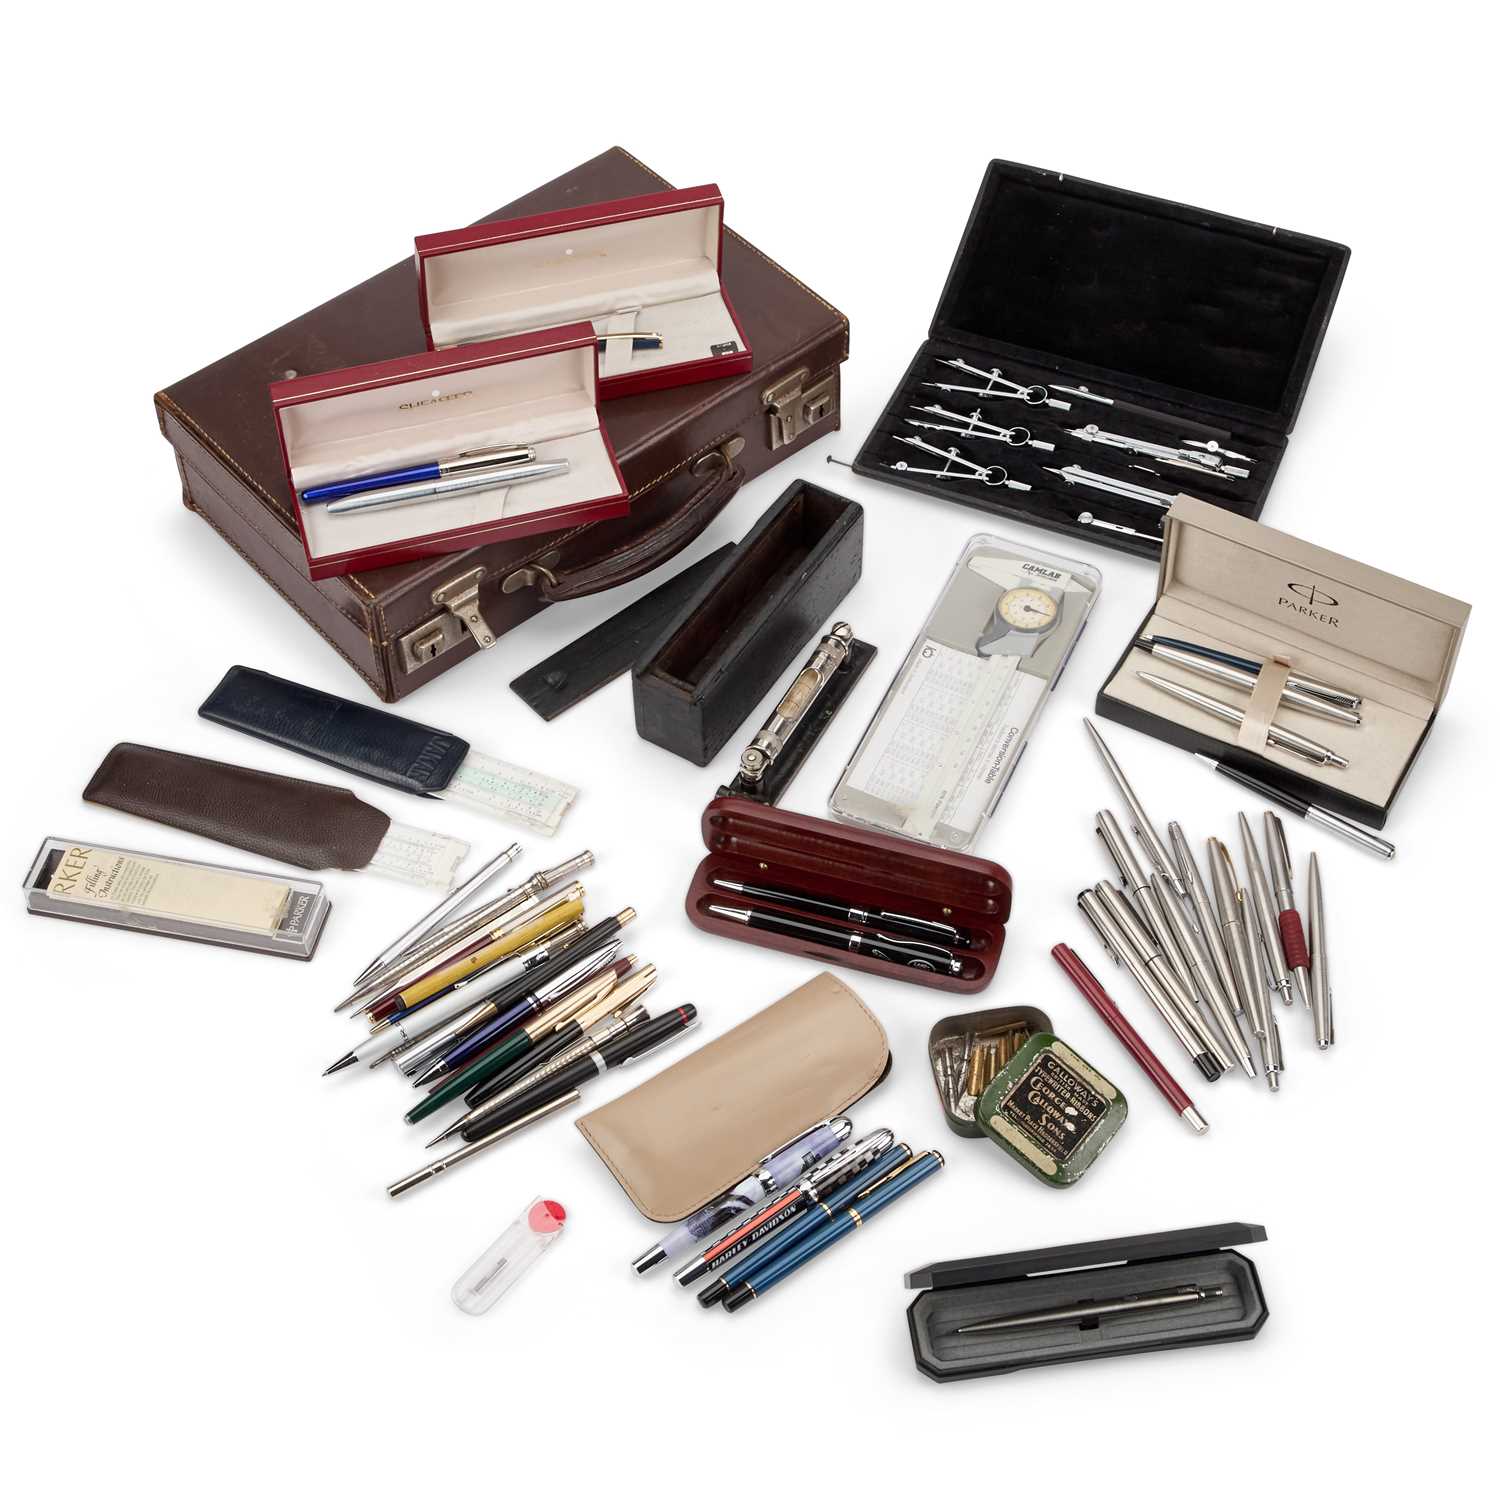 A LARGE COLLECTION OF PENS AND WRITING TOOLS